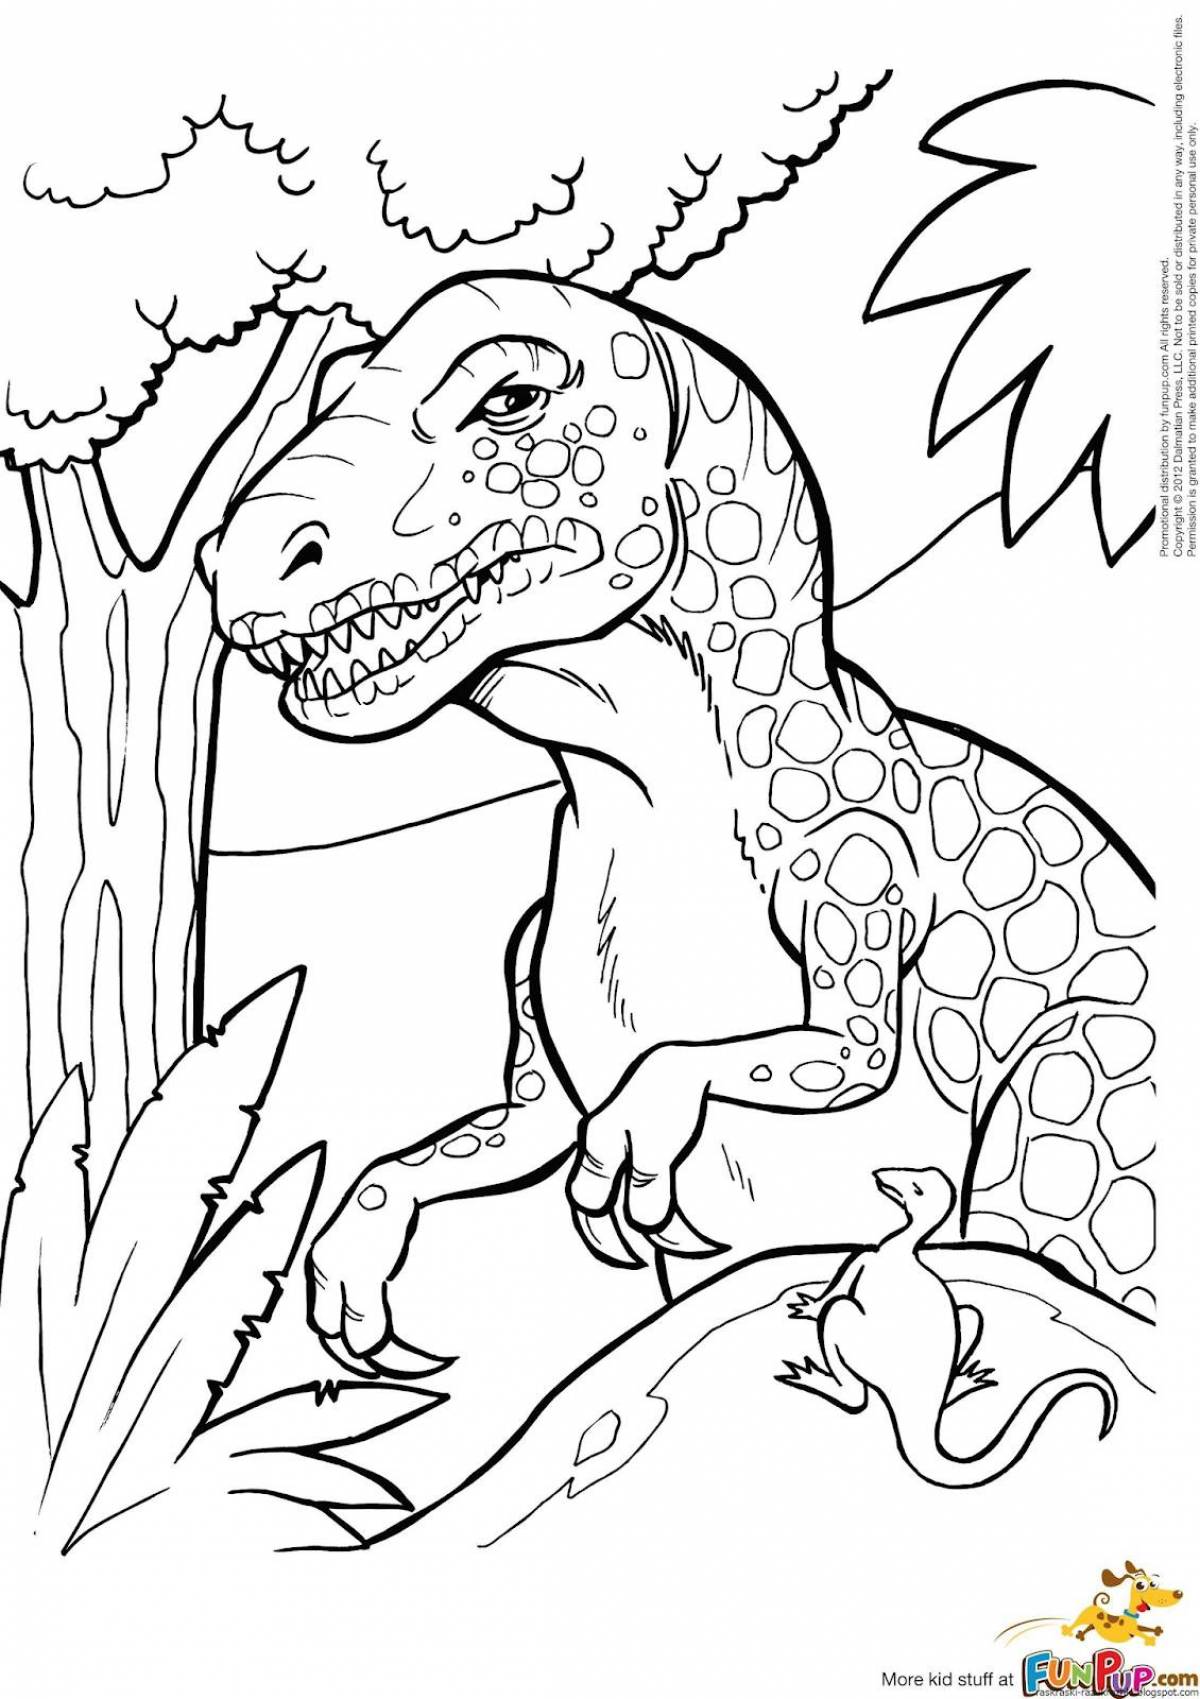 Living dinosaur coloring book for 4-5 year olds